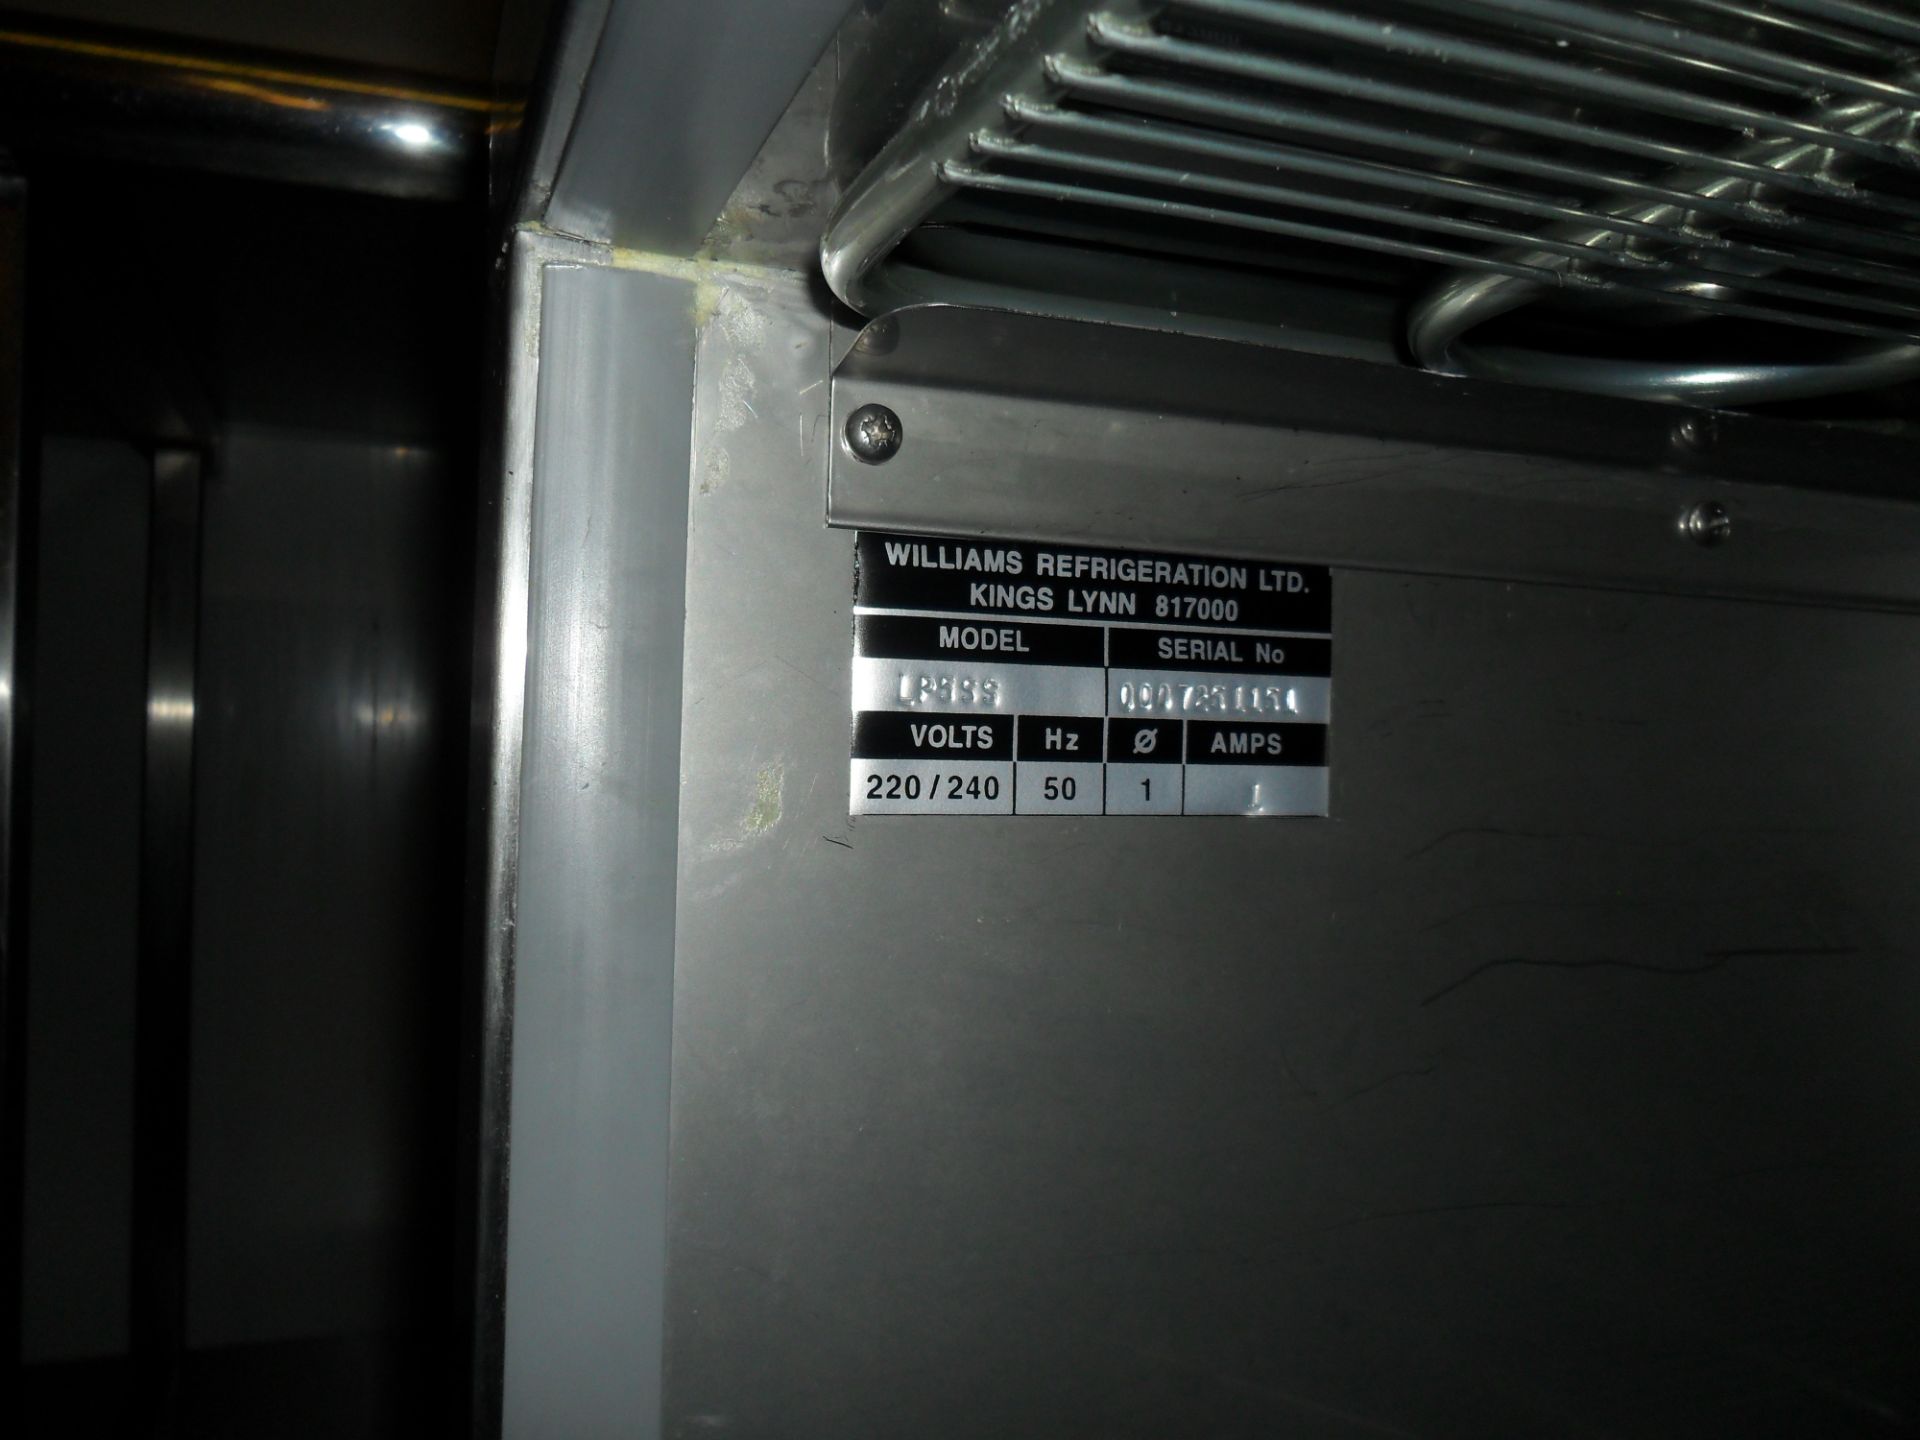 Williams under counter stainless steel freezer. Very clean still with plastic coated packing seal on - Image 2 of 3